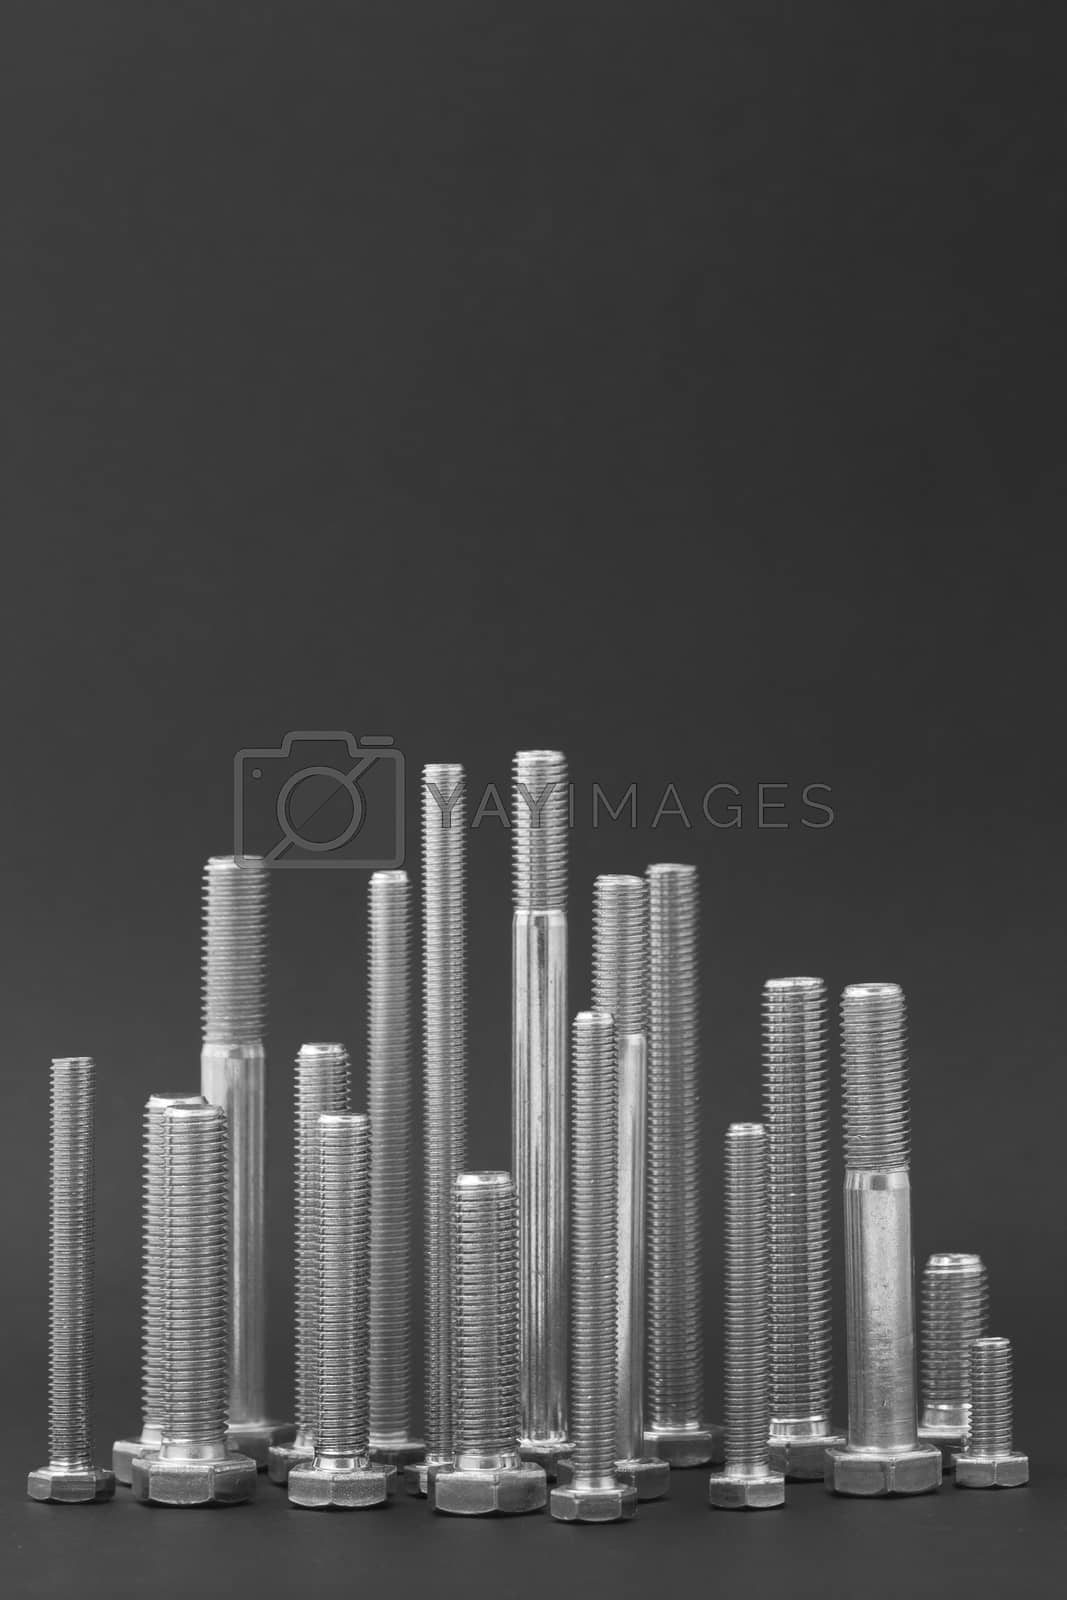 Royalty free image of Various Isolated bolts on a dark background by mailos